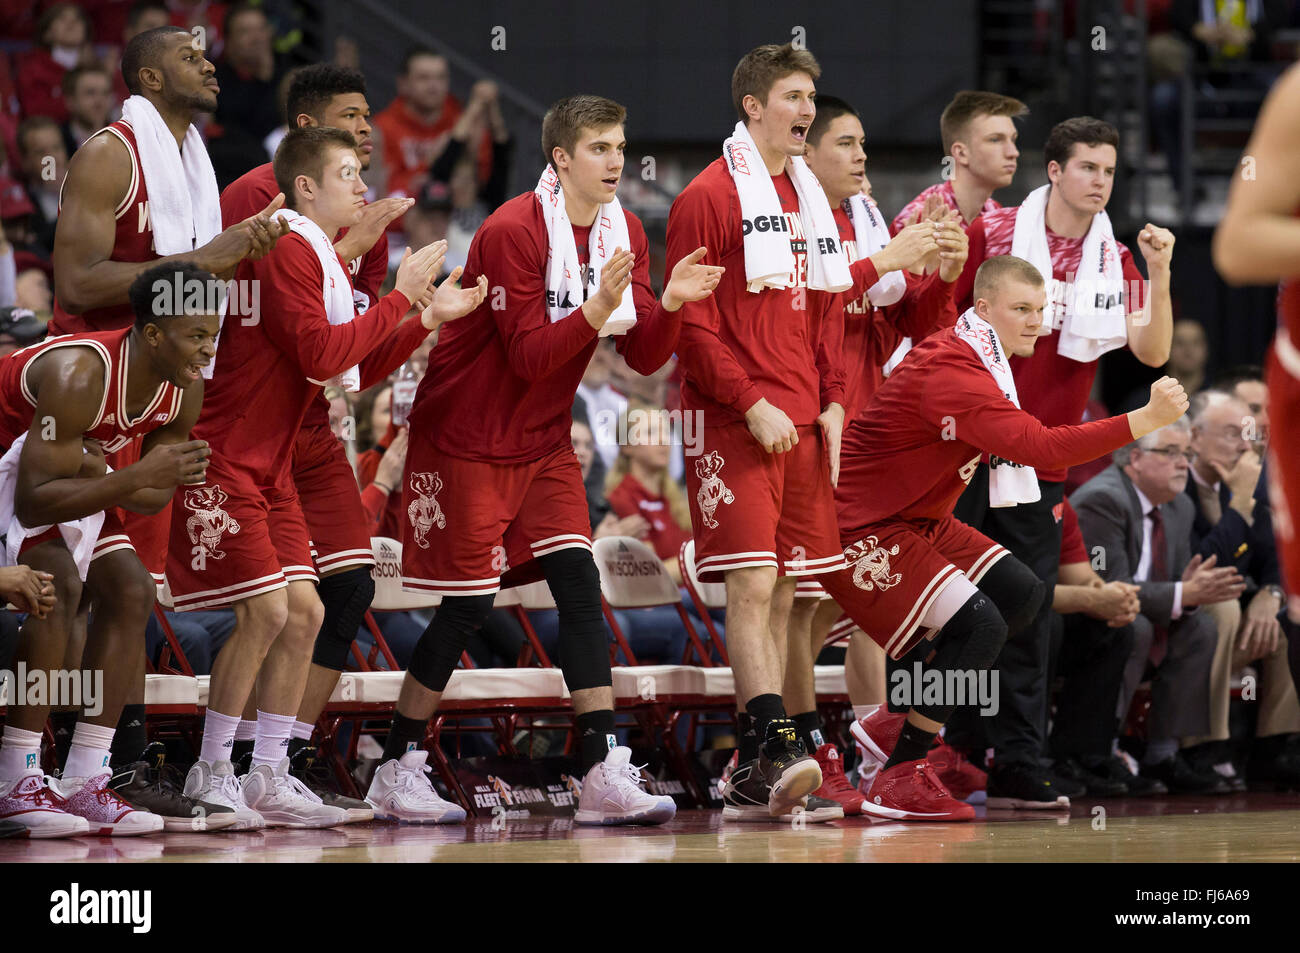 Madison, WI, USA. 28th Feb, 2016. Wisconsin bench reacts during the NCAA Basketball game between the Michigan Wolverines and the Wisconsin Badgers at the Kohl Center in Madison, WI. Wisconsin defeated Michigan 68-57. John Fisher/CSM/Alamy Live News Stock Photo